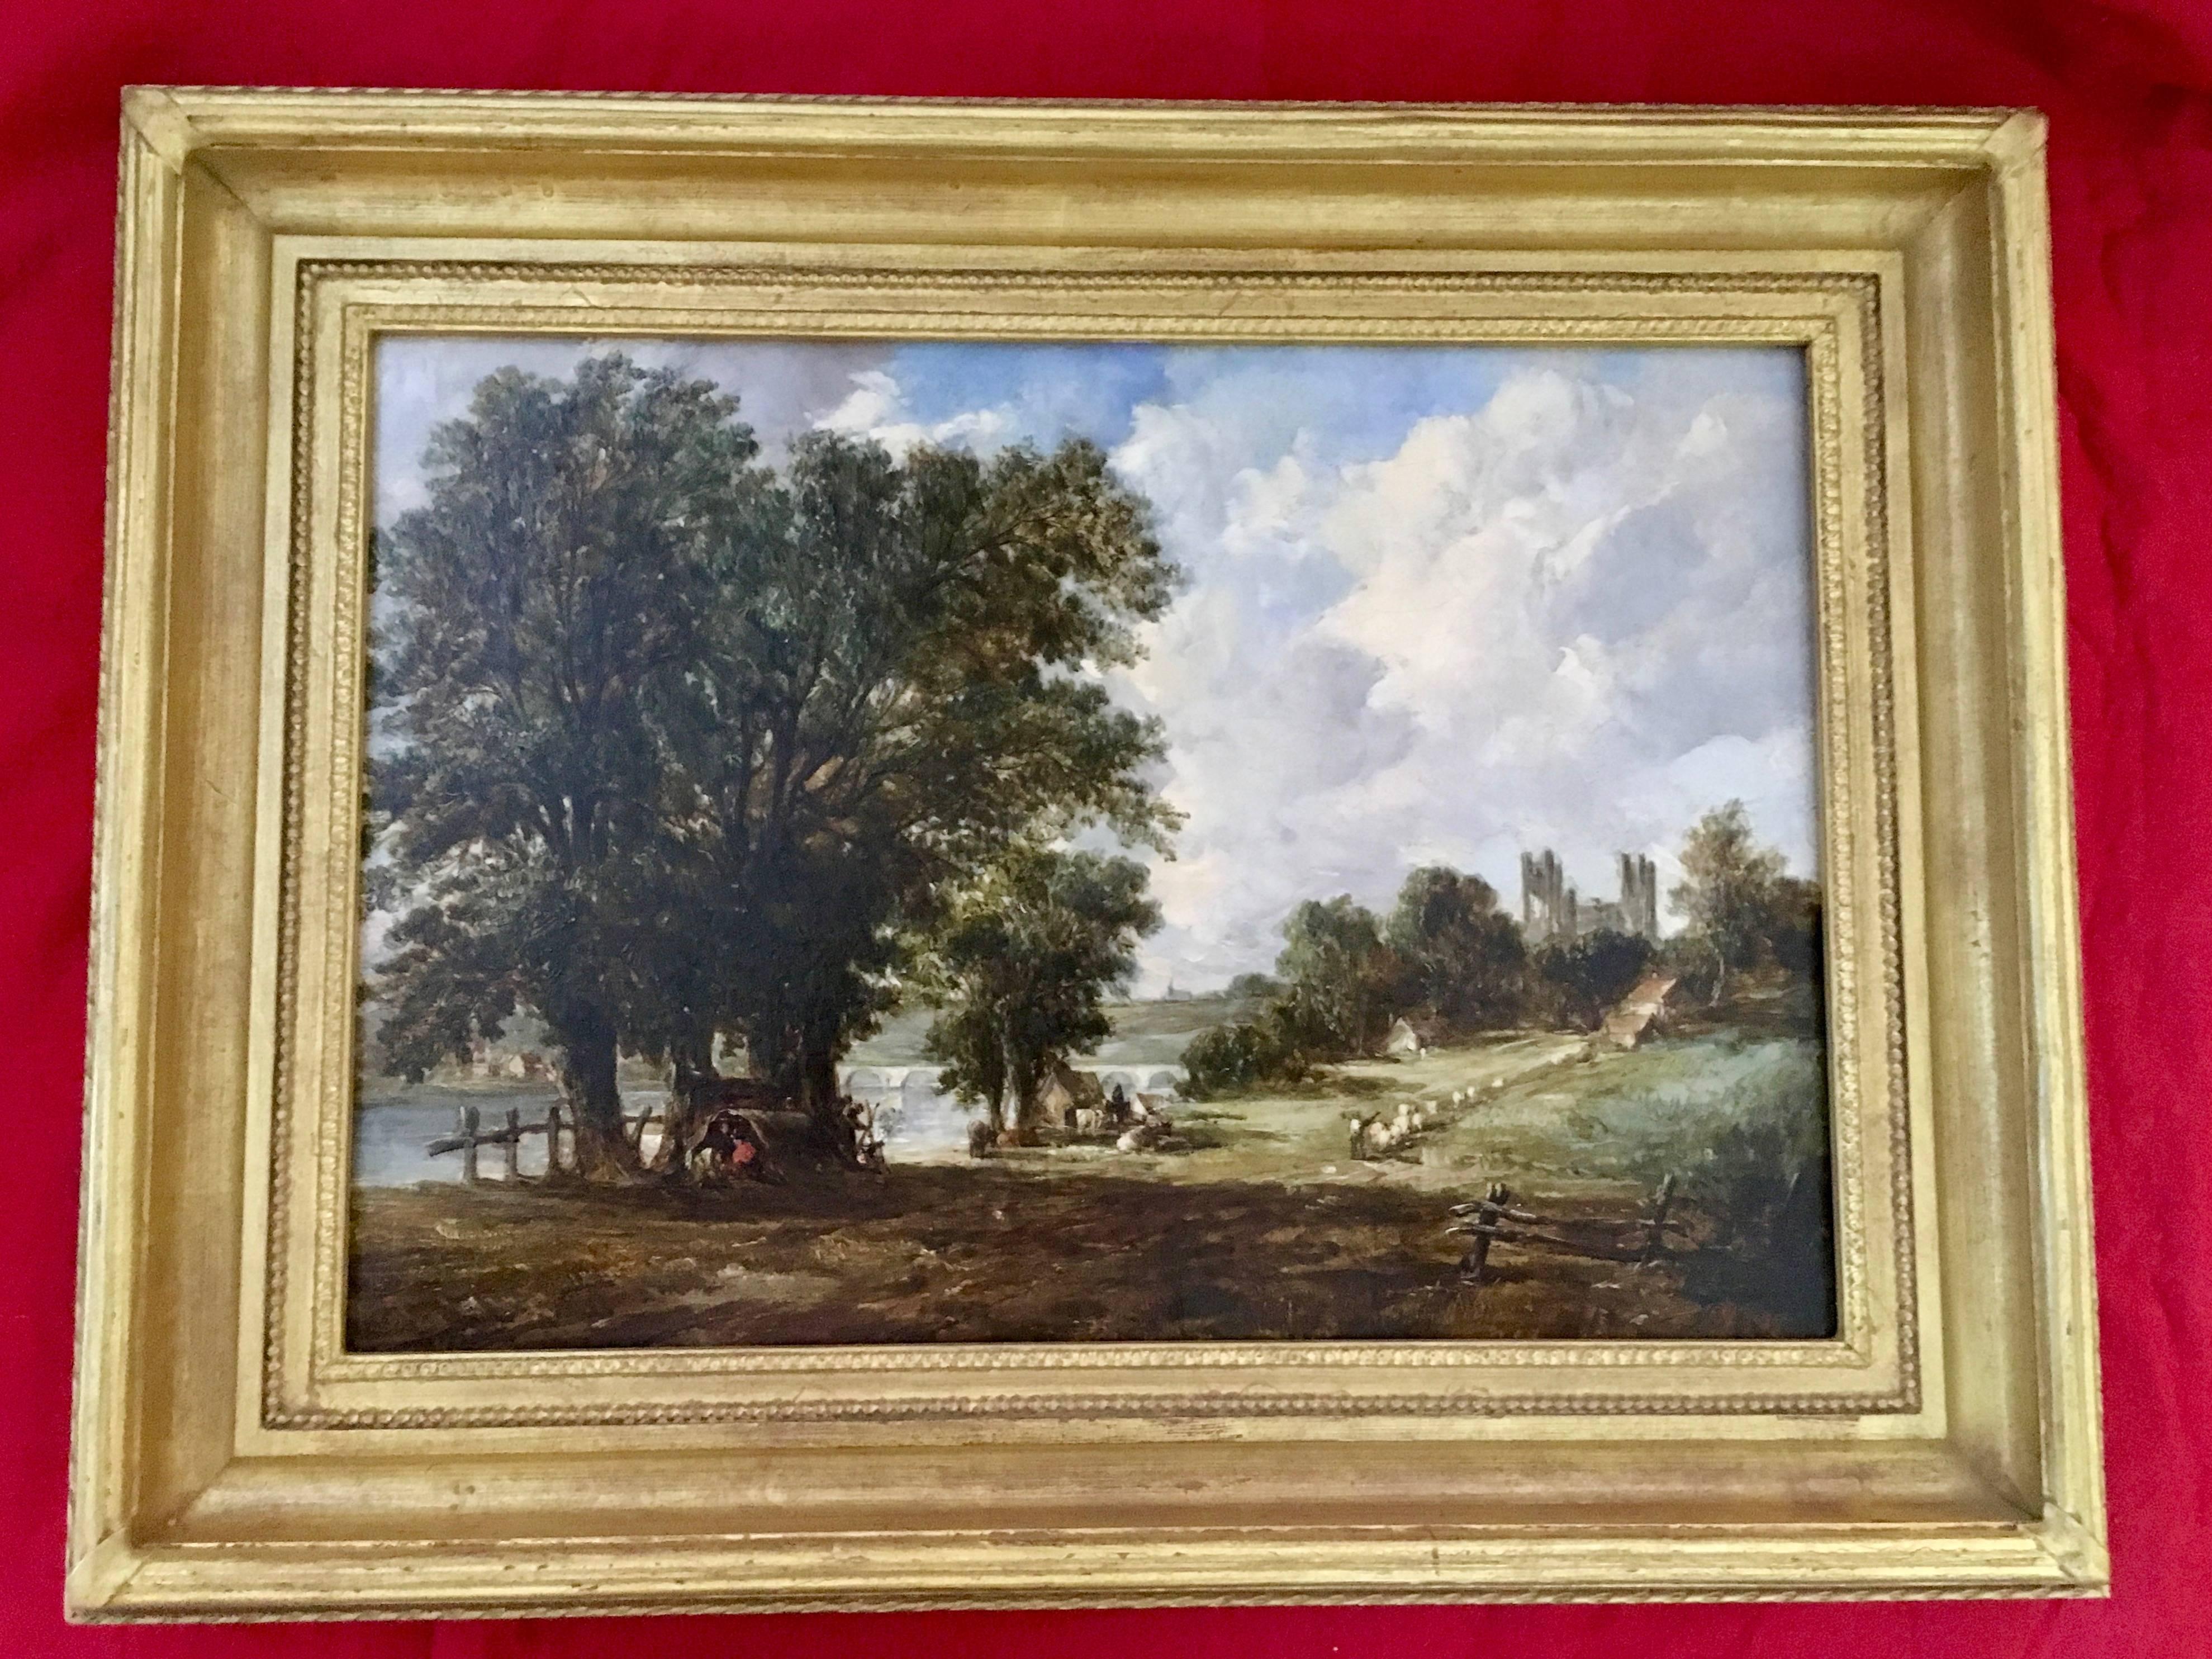 Alfred Vickers Landscape Painting - Extensive Victorian 19th century English River Landscape with people with a tent